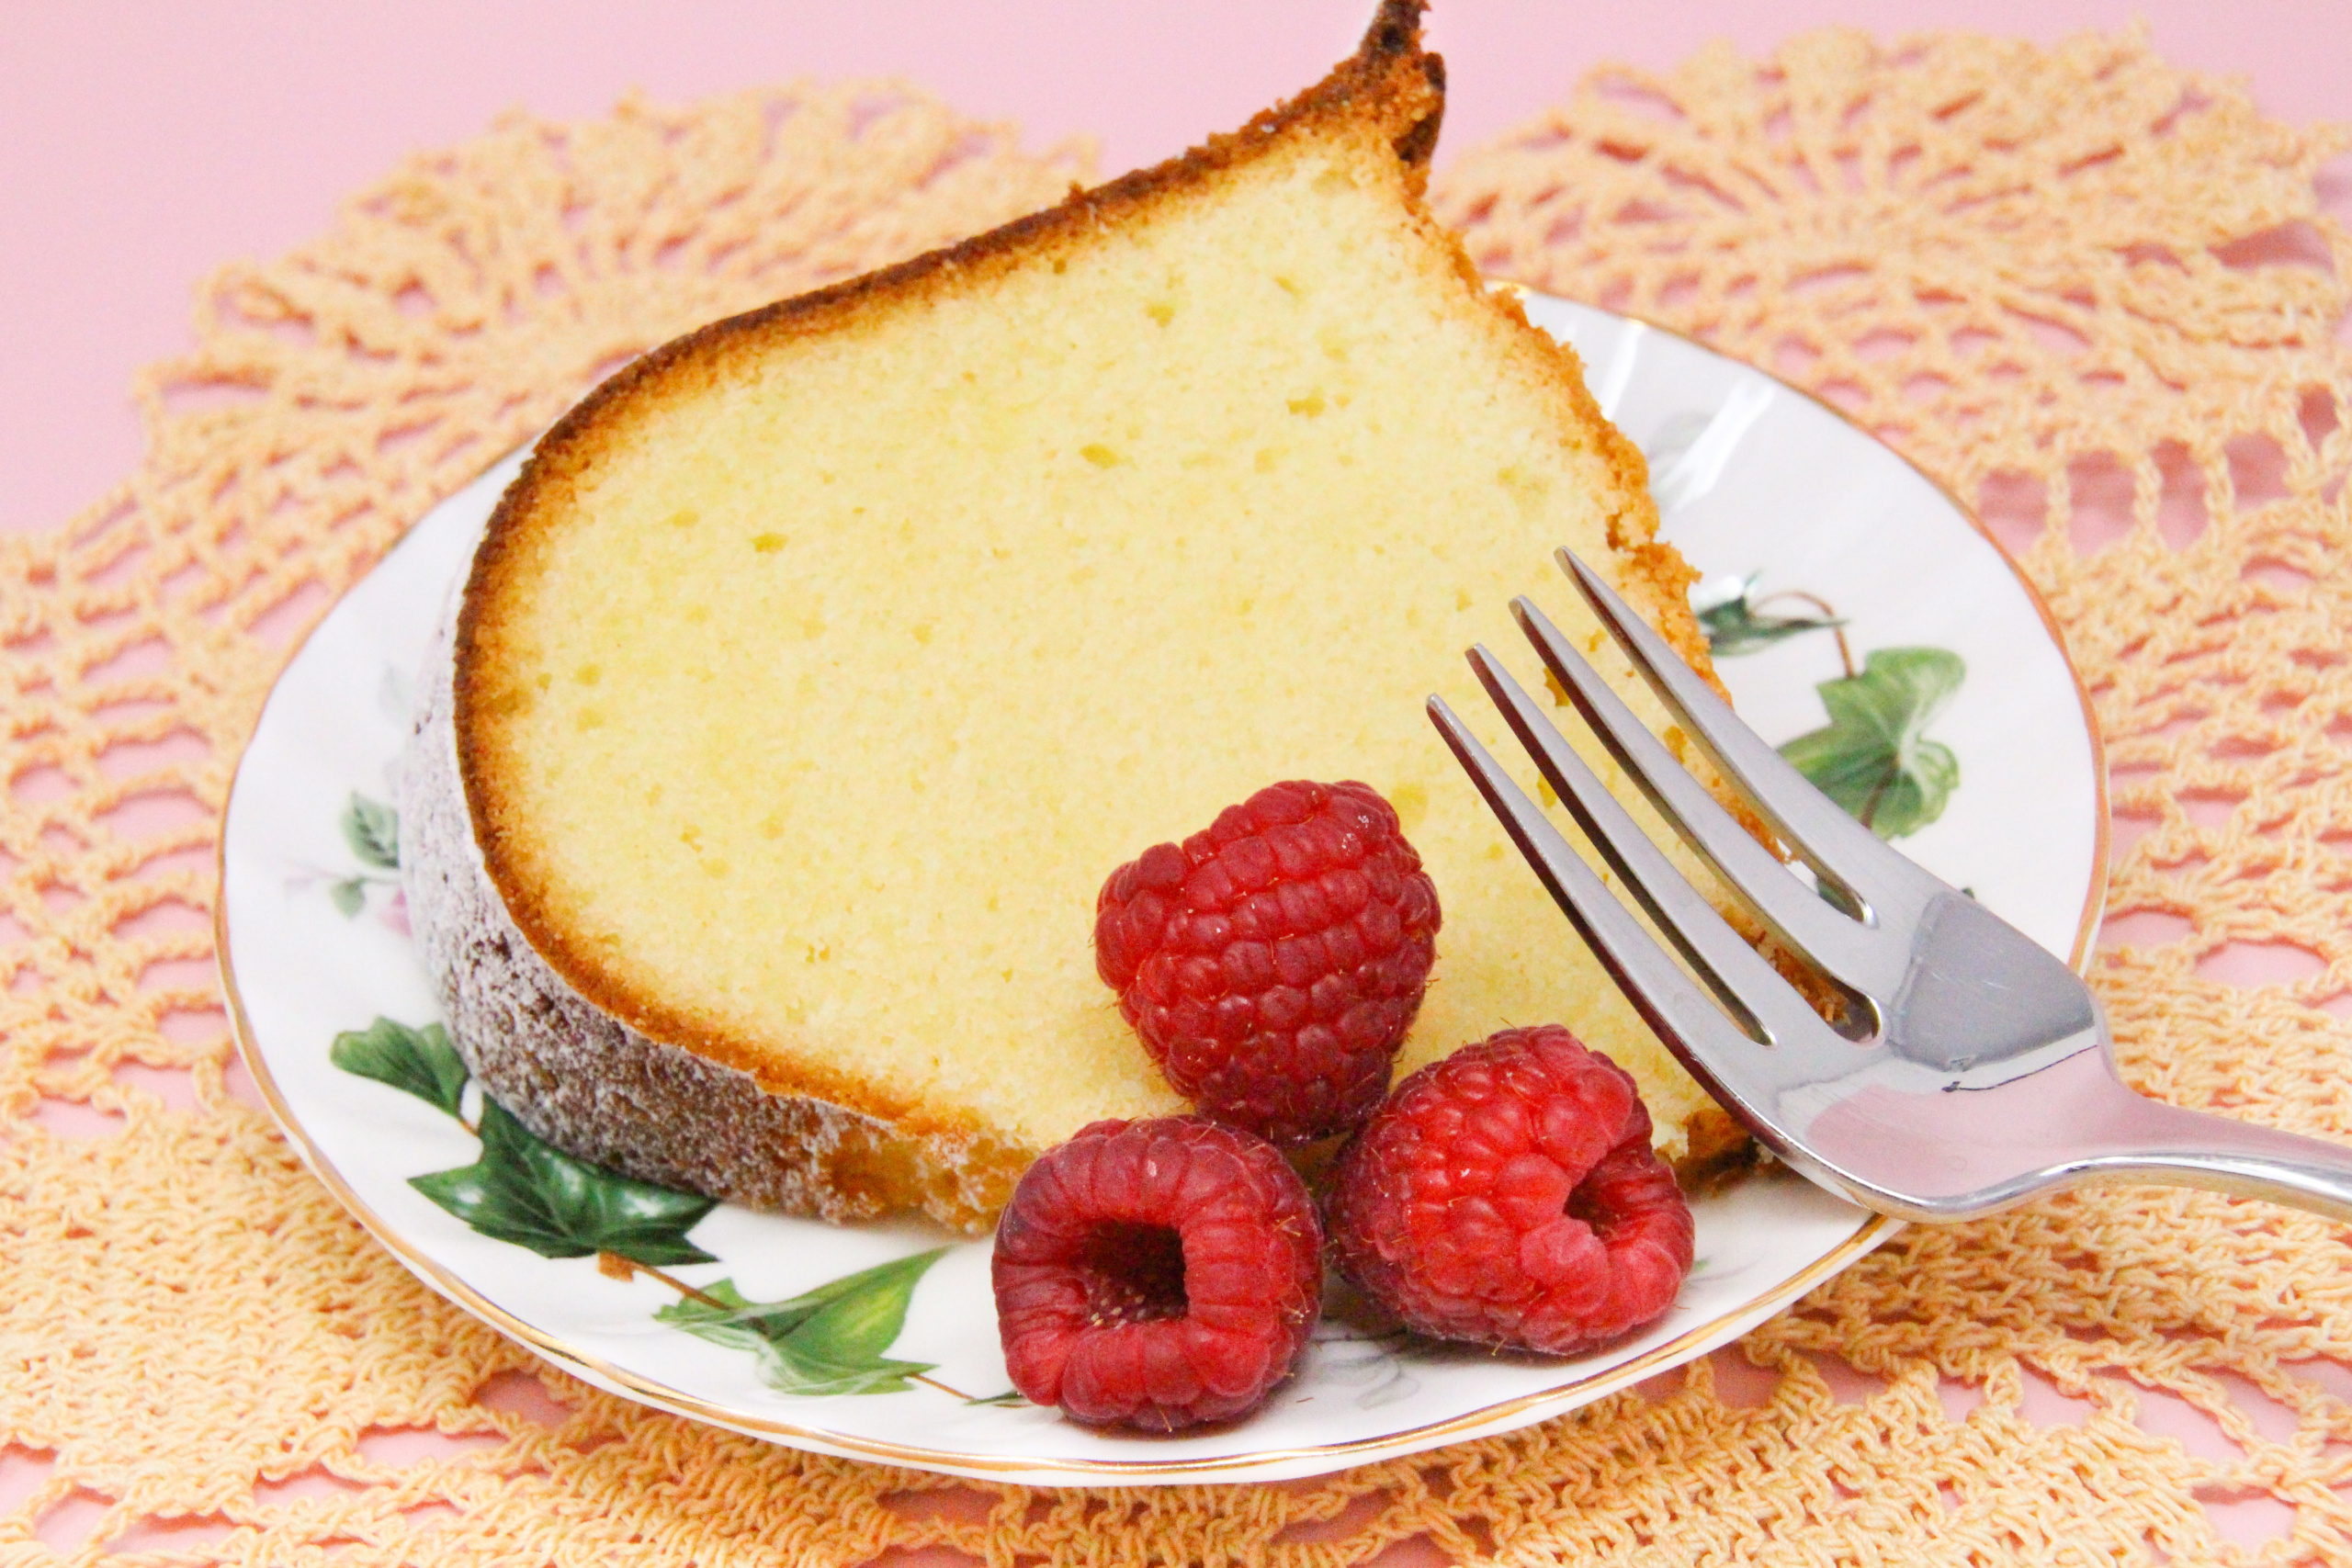 Old-Fashioned Pound Cake is an ultra rich, dense cake that is perfect on it's own or used as a canvas for berries, ice cream, or whipped cream to satisfy your sweet tooth. Recipe shared with permission granted by Valerie Burns, author of A CUP OF FLOUR, A PINCH OF DEATH. 